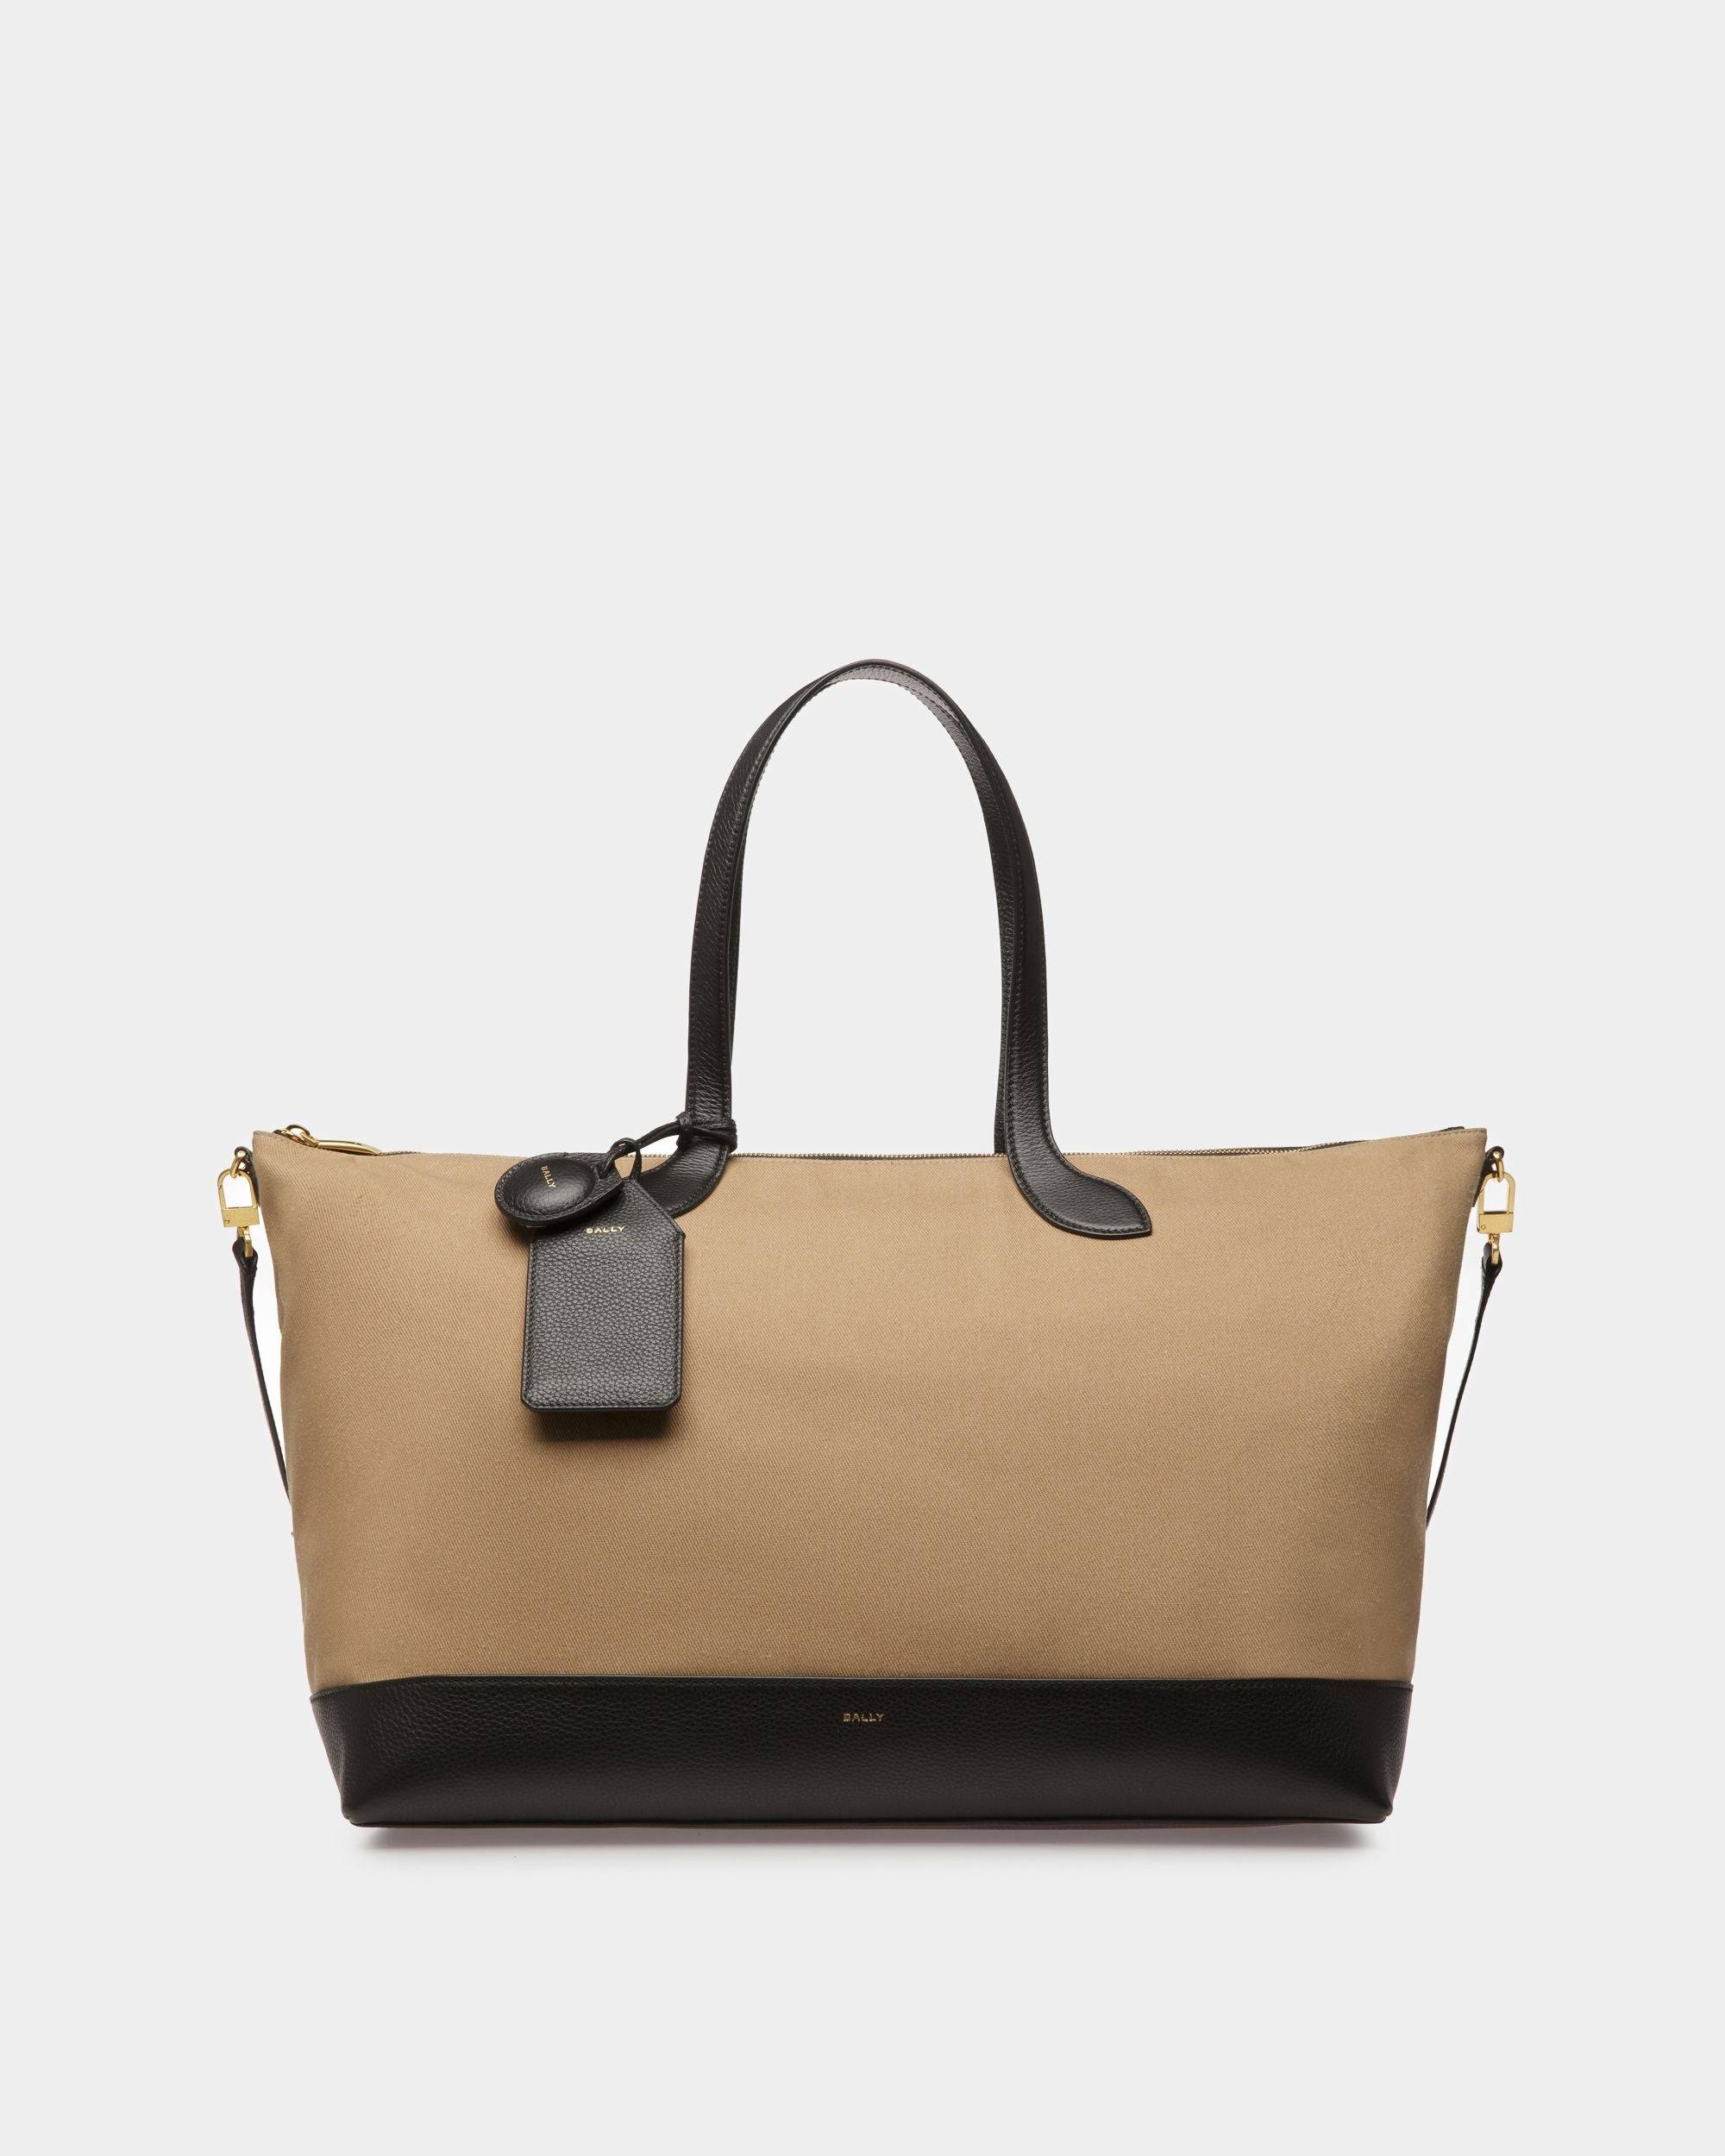 24 Hours | Women's Tote Bag | Sand And Black Fabric | Bally | Still Life Front